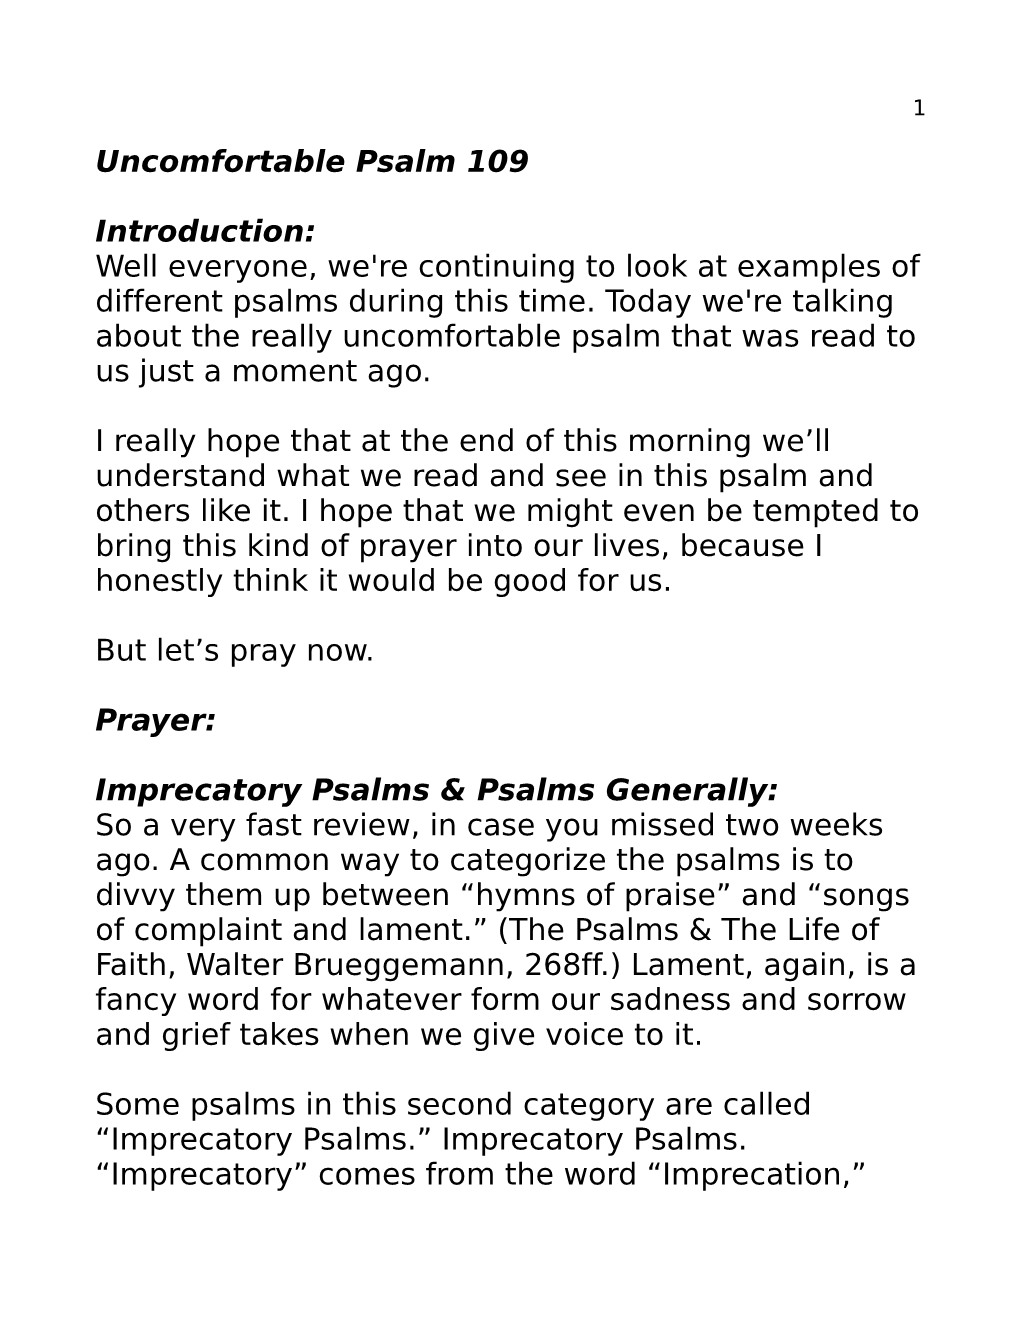 Uncomfortable Psalm 109 Introduction: Well Everyone, We're Continuing to Look at Examples of Different Psalms During This Time